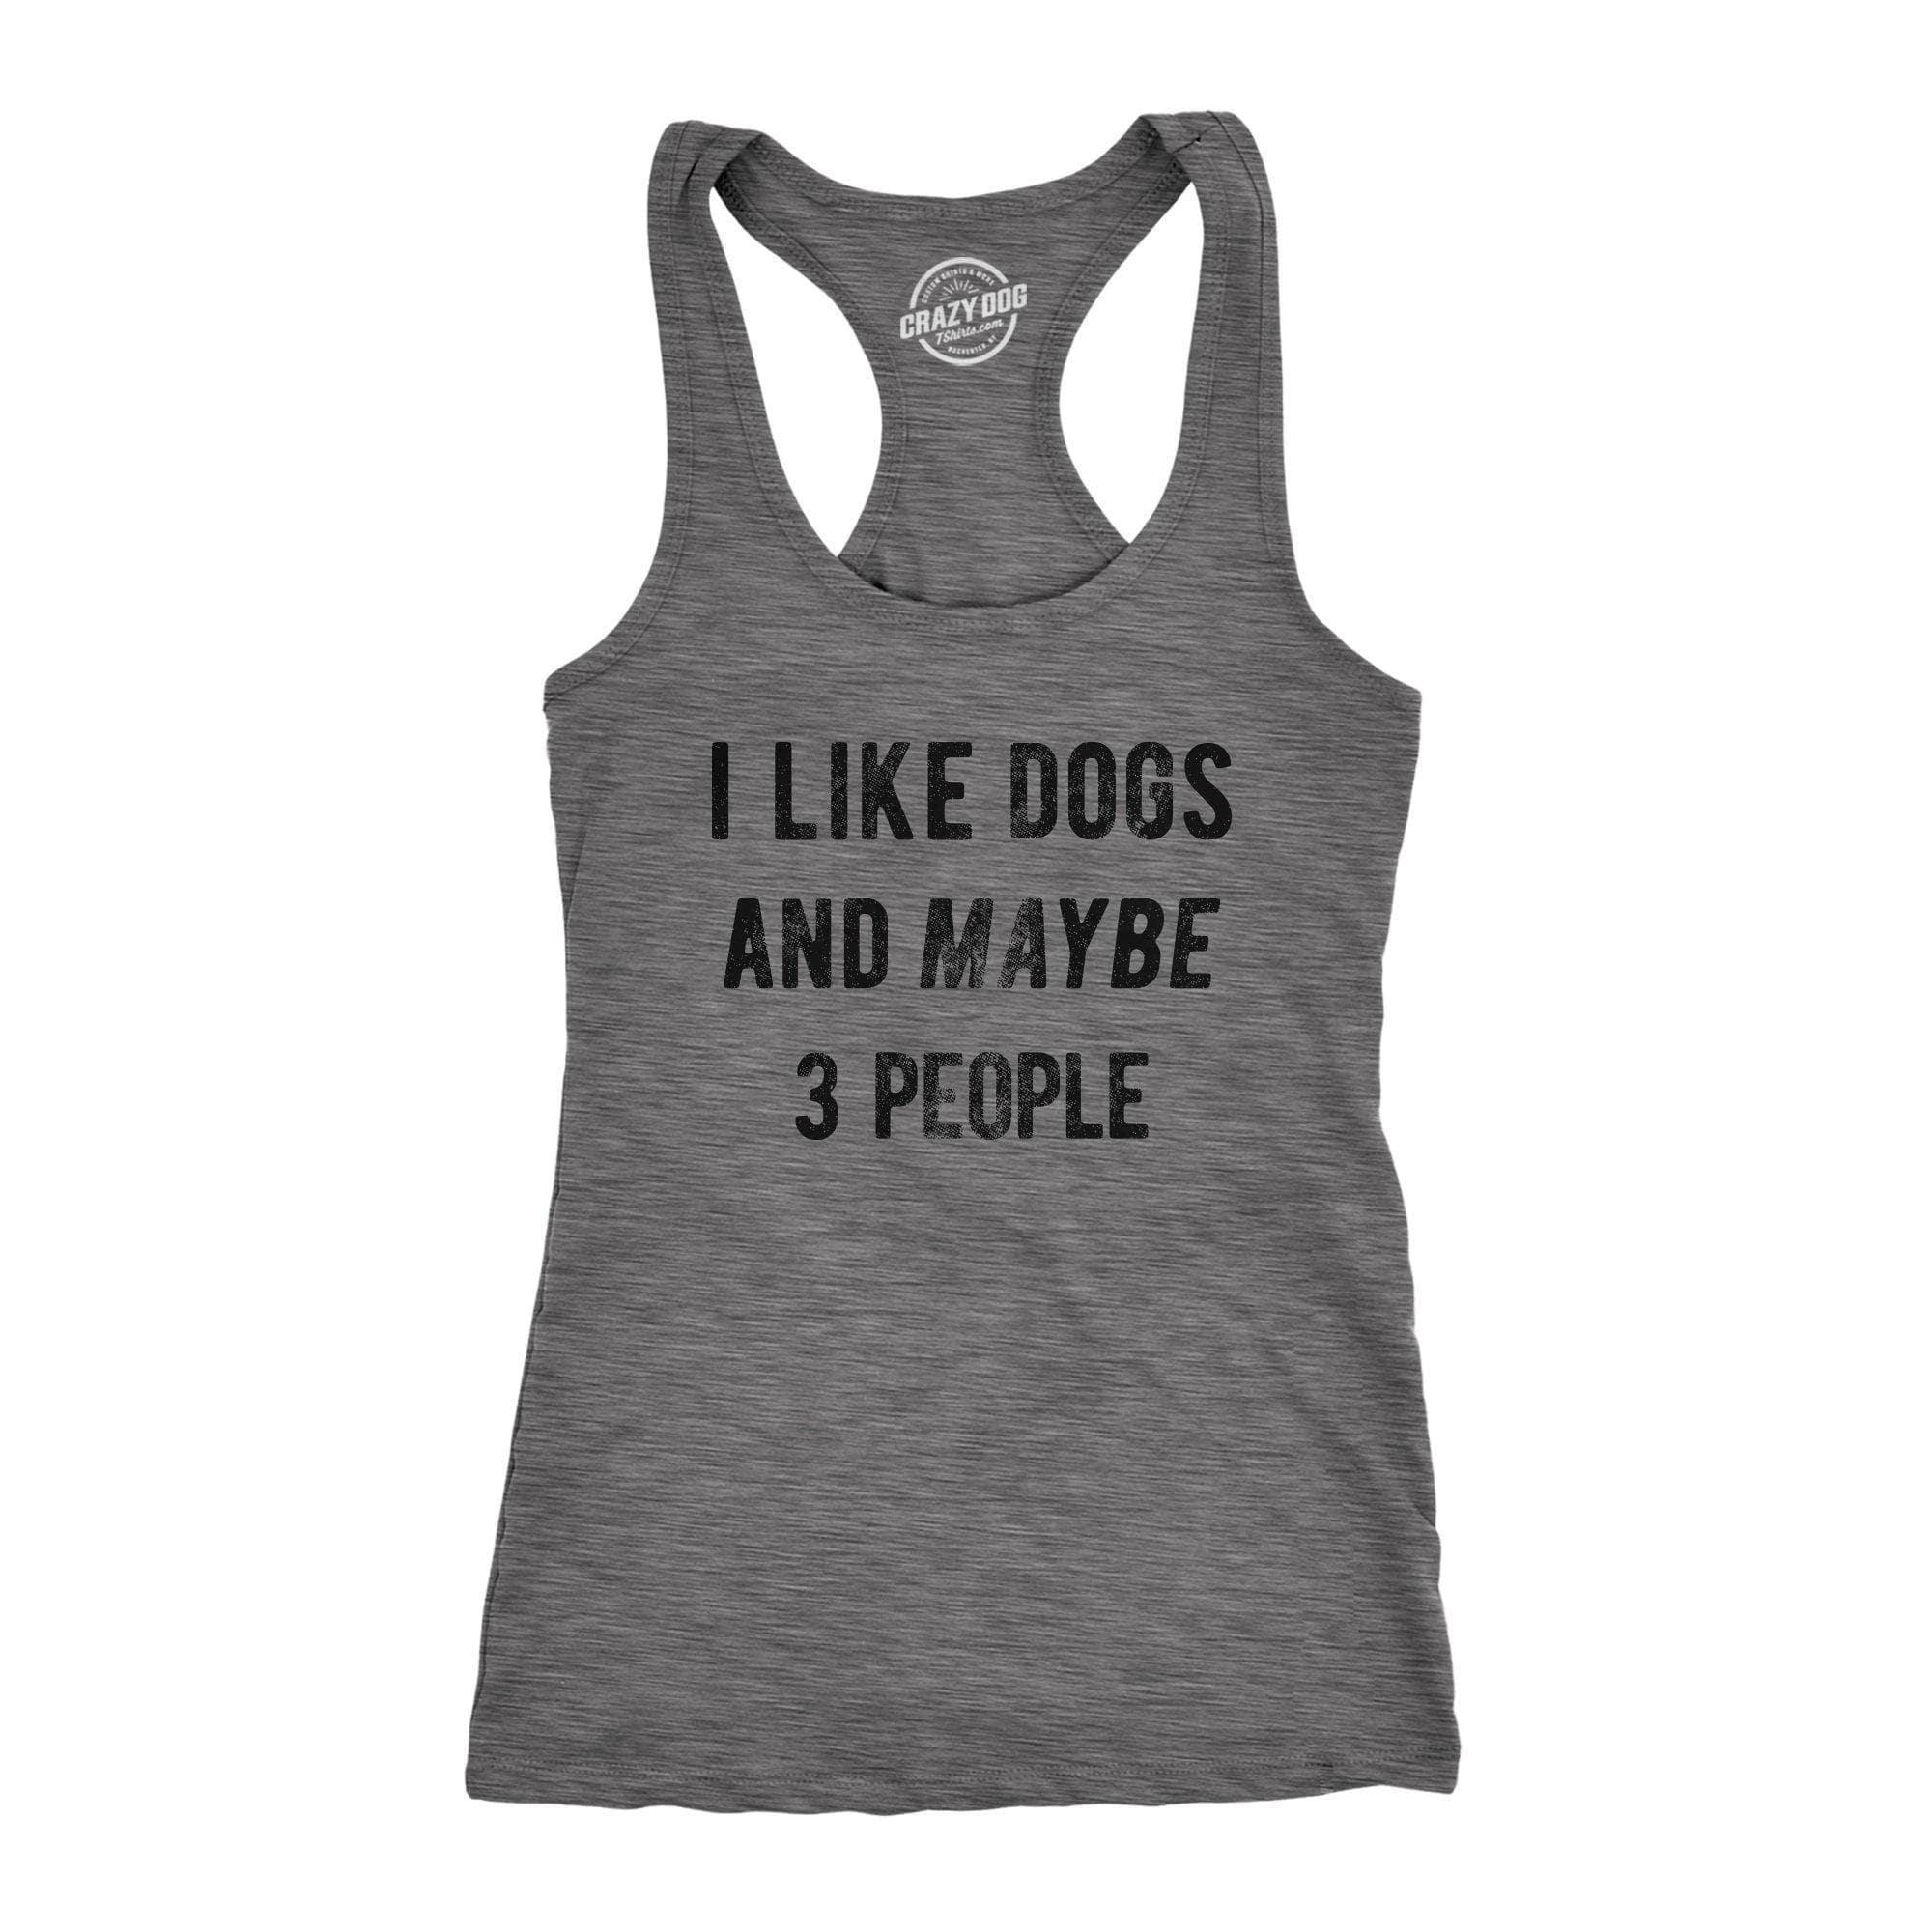 I Like Dogs And Maybe 3 People Women's Tank Top - Crazy Dog T-Shirts